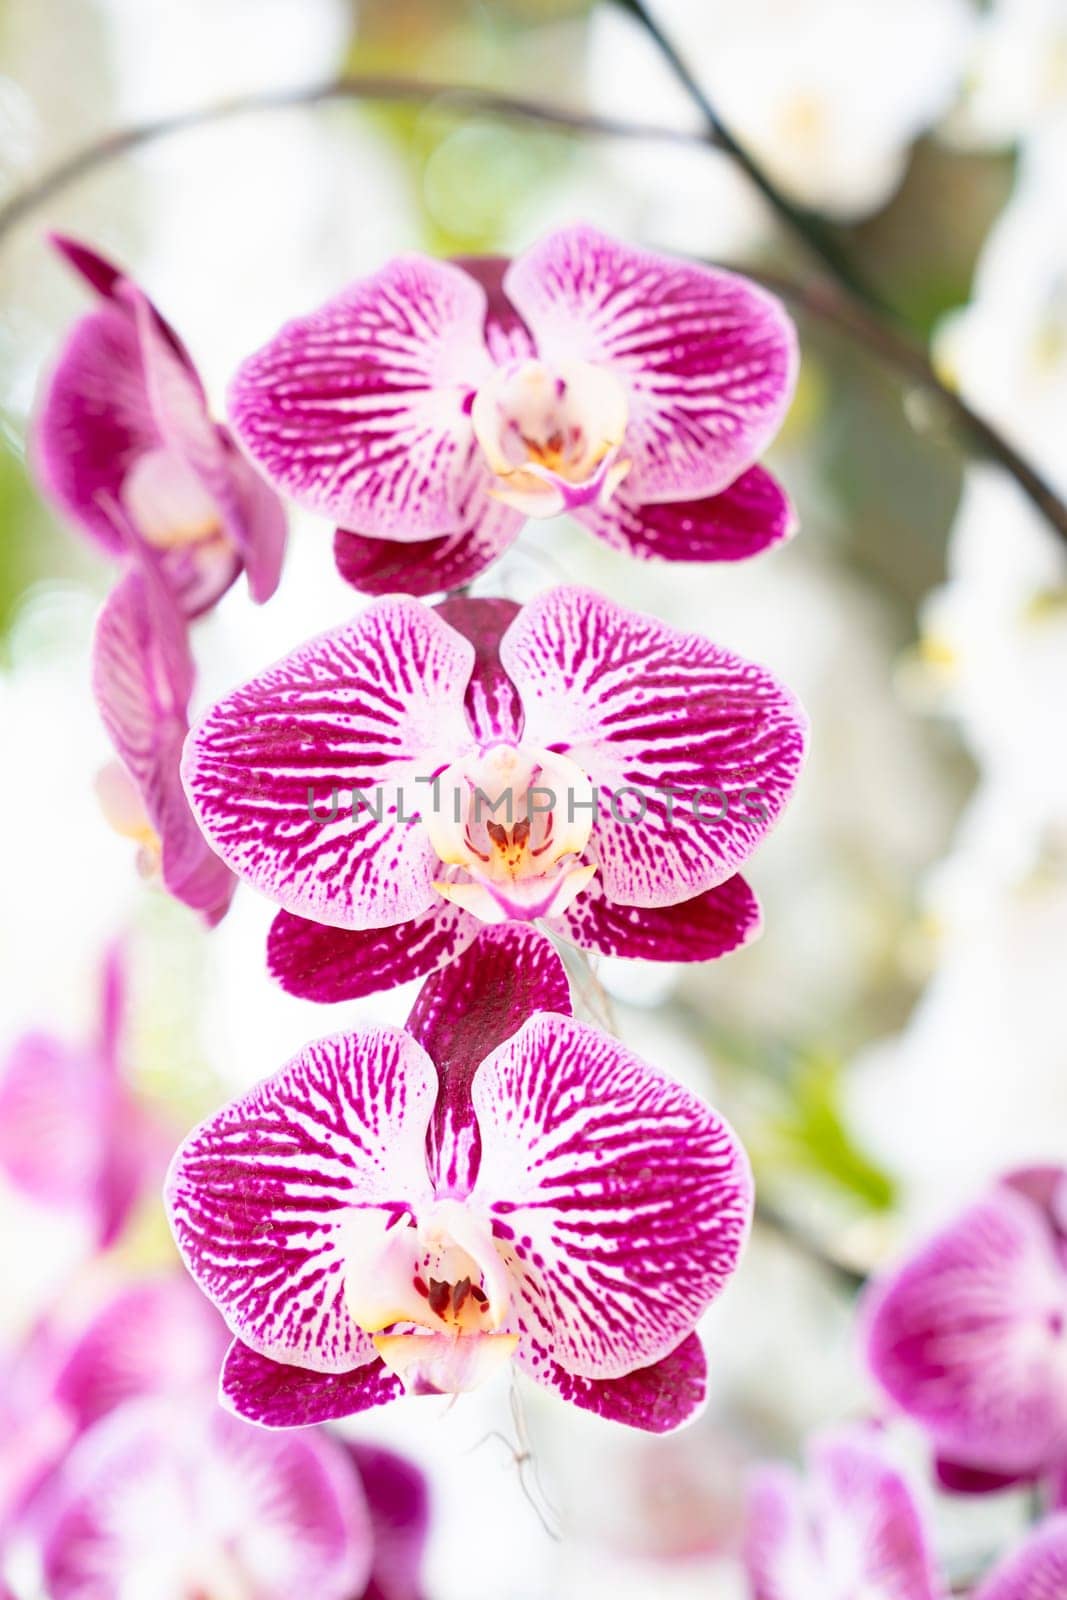 The Beautiful pink blooming orchid flowers in macro. by Gamjai